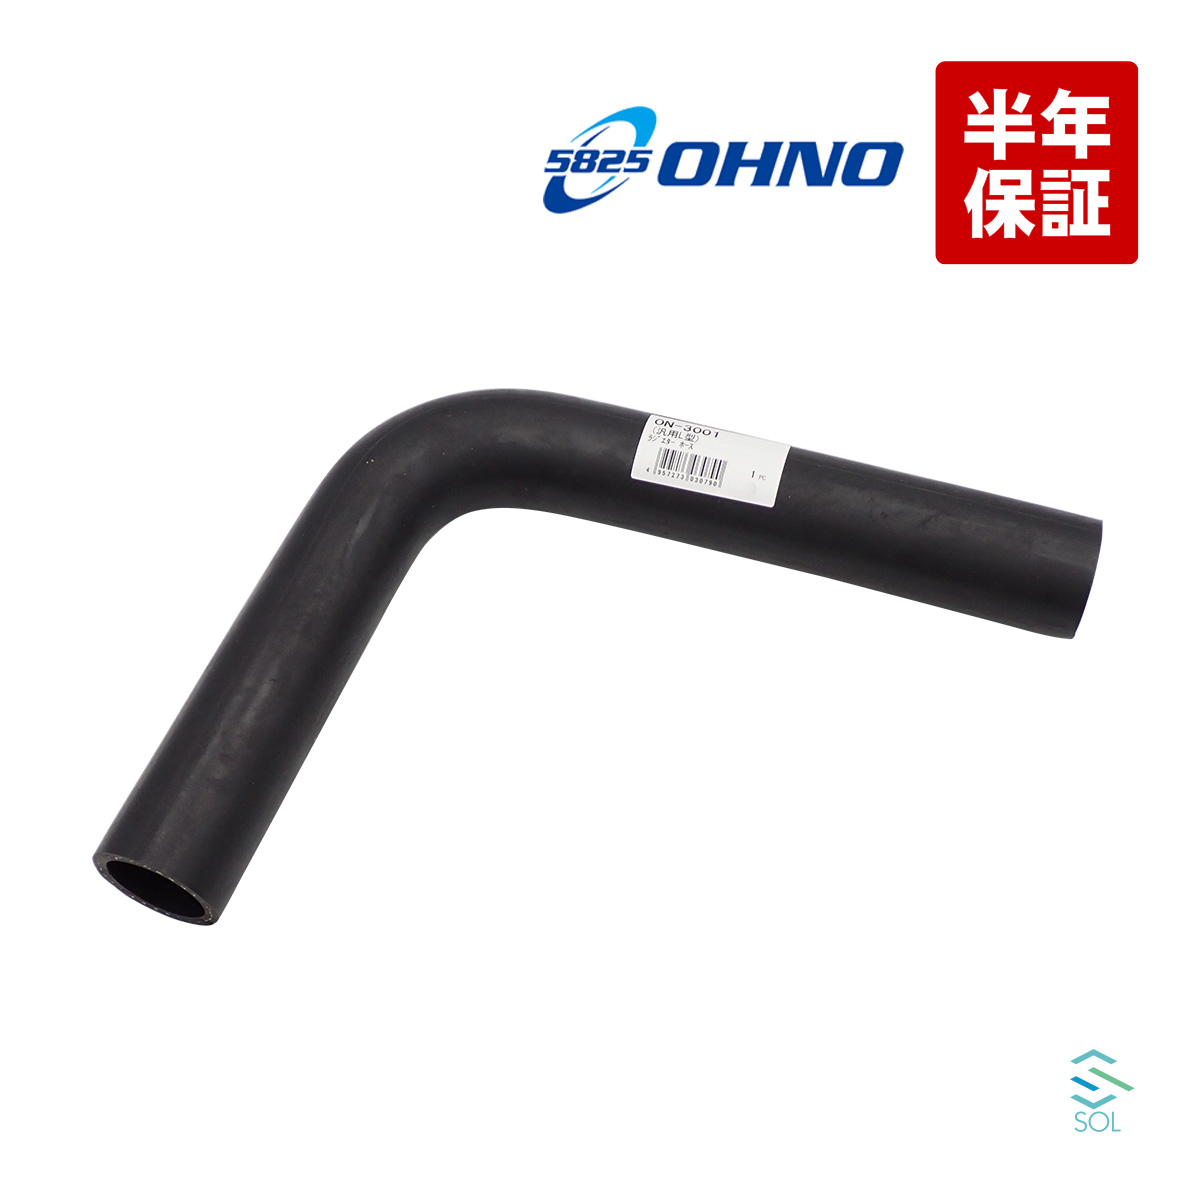  Oono rubber all-purpose radiator hose L type hose inside diameter 33.5mm ON-3001 OHNO L character water heater shipping deadline 18 hour 